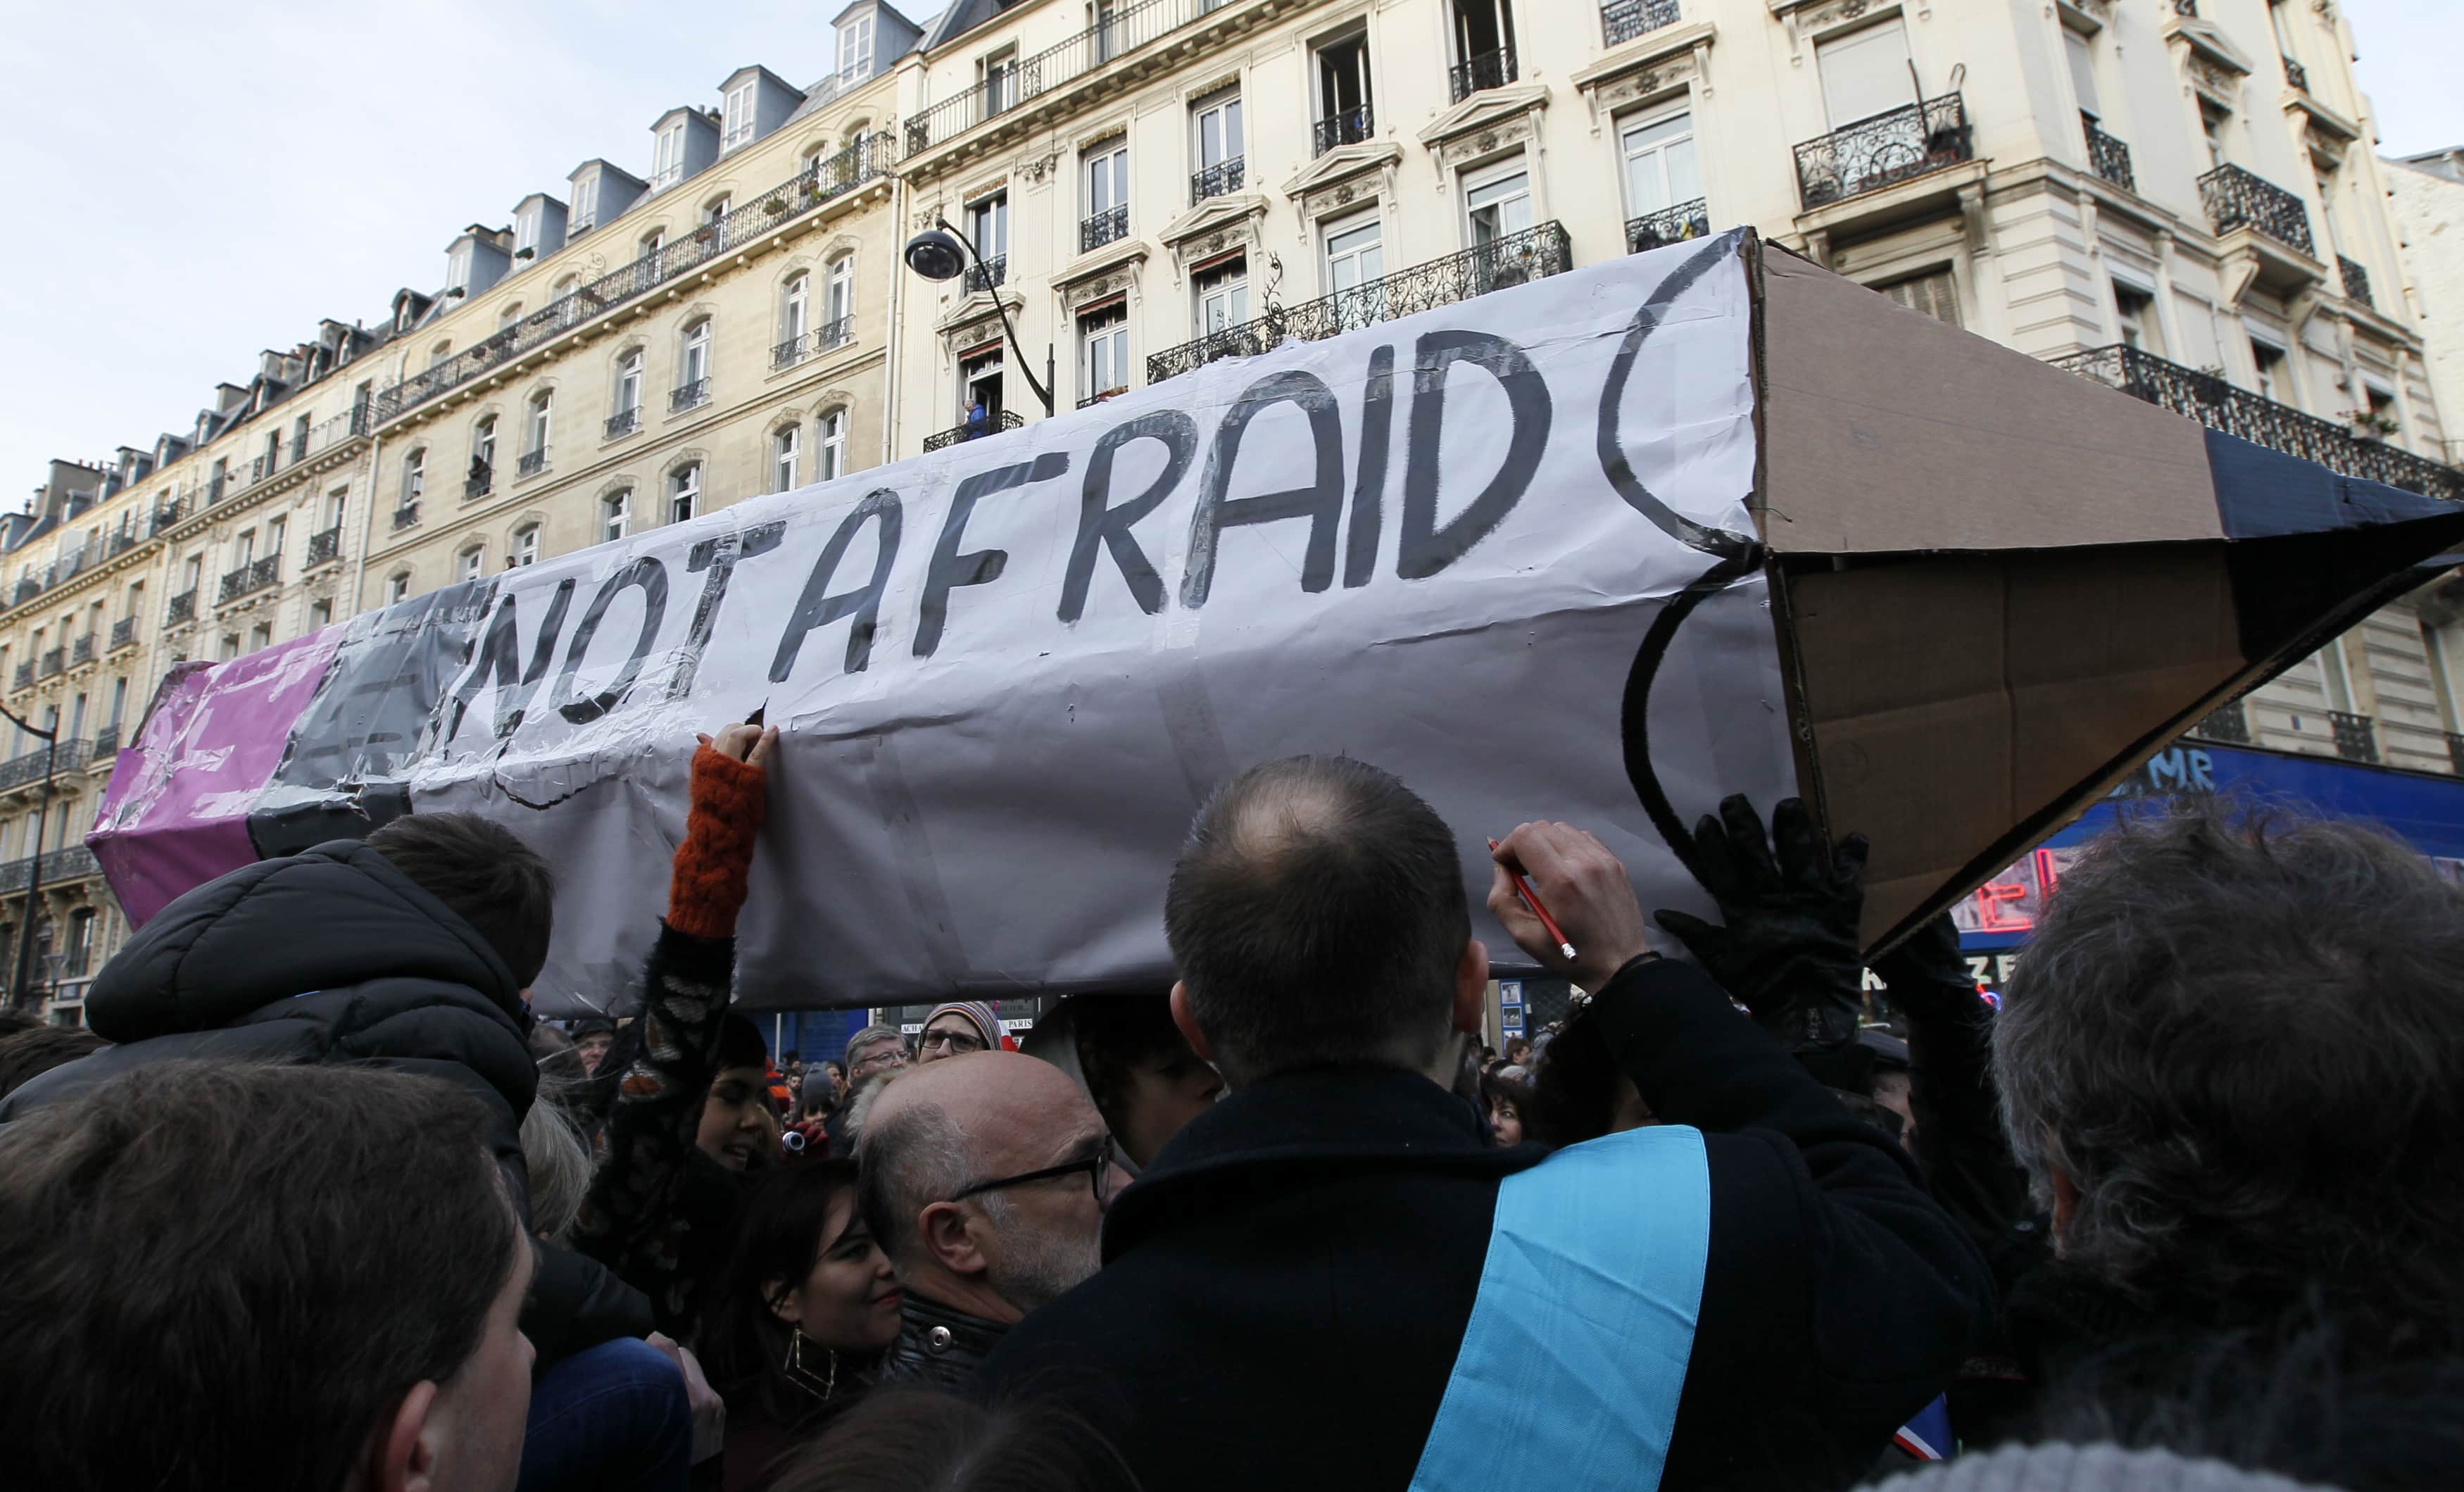 Protesters carrying a giant cardboard pencil reading "Not Afraid" take part in a solidarity march in the streets of Paris January 11, 2015, REUTERS/Youssef Boudlal